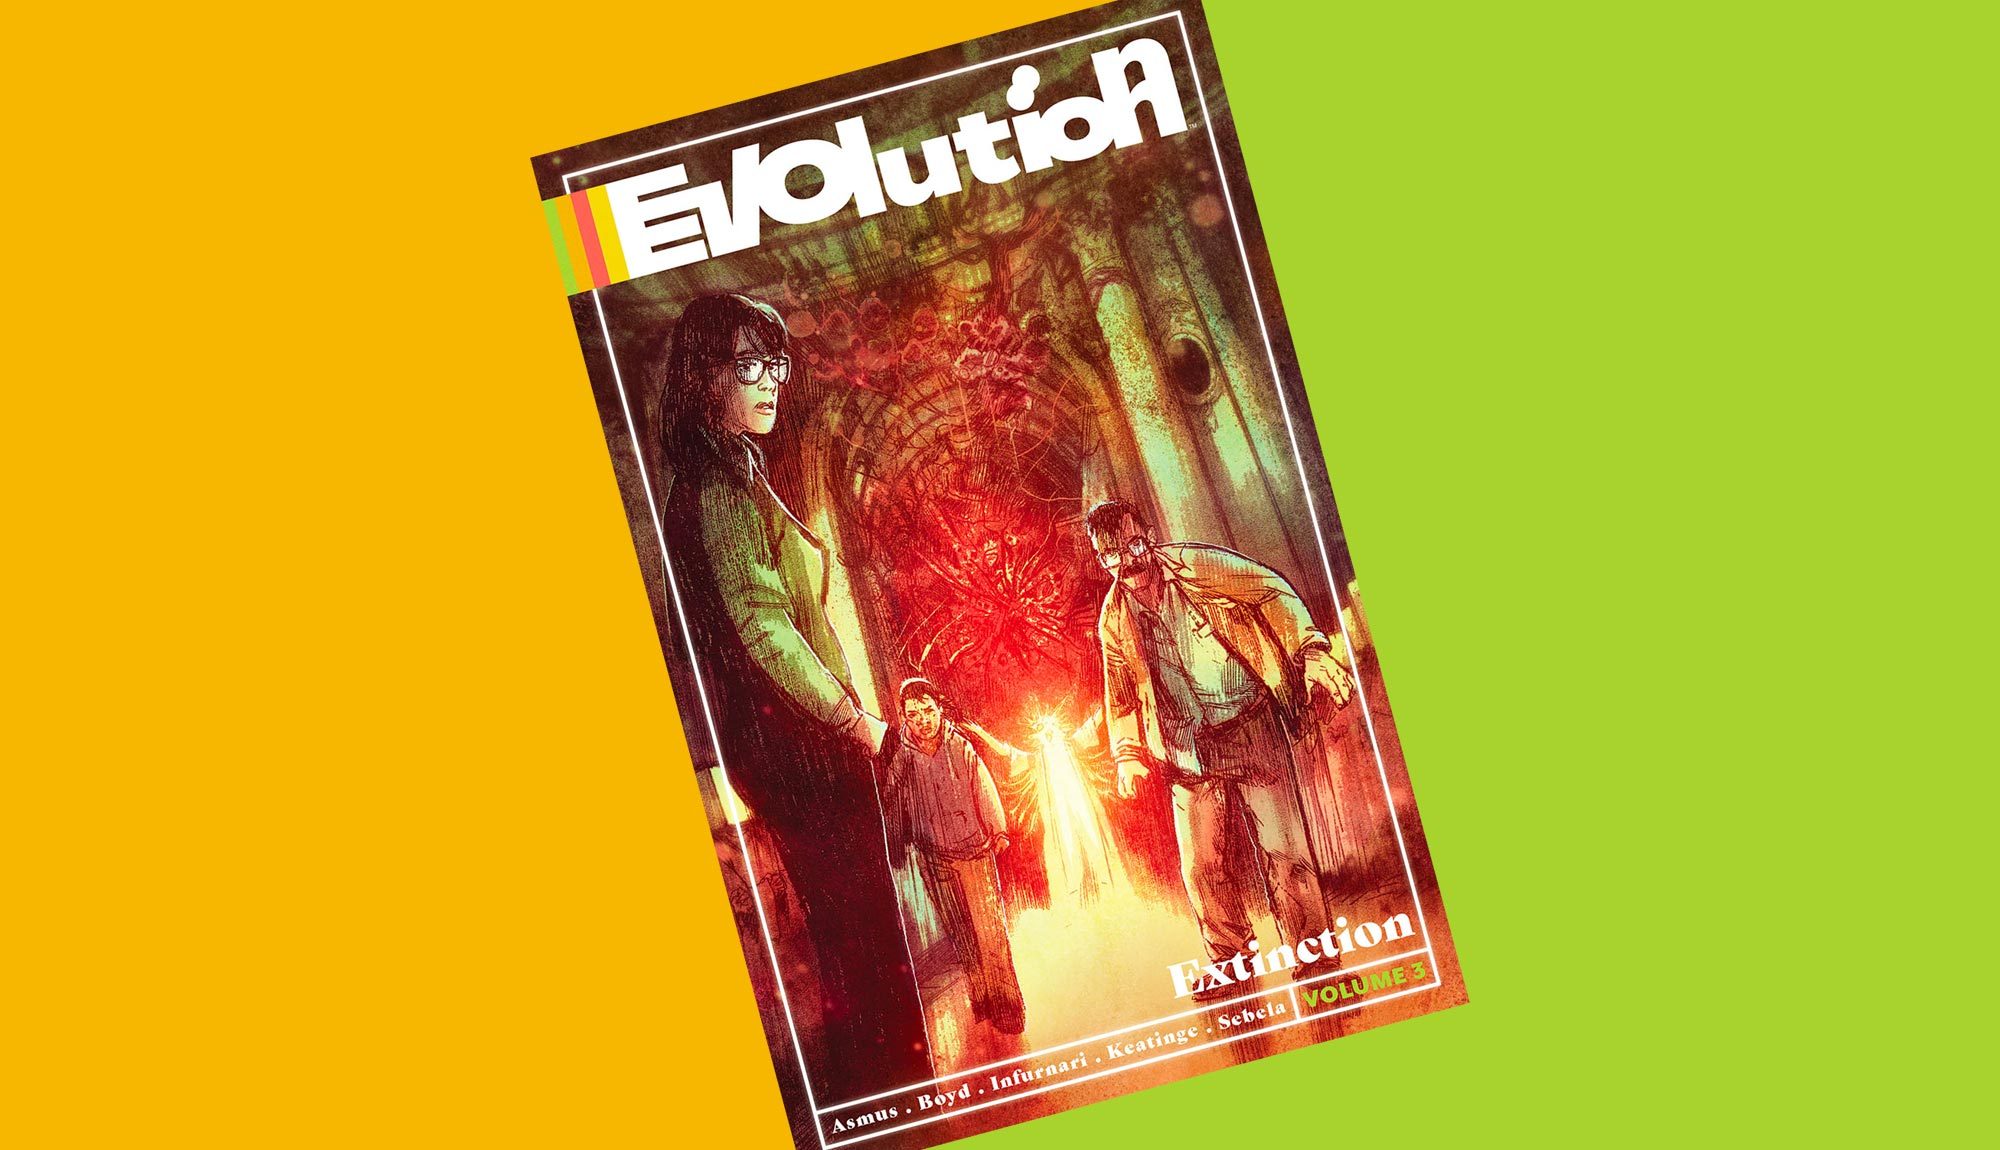 EVOLUTION Volume 3 Is Out This Week